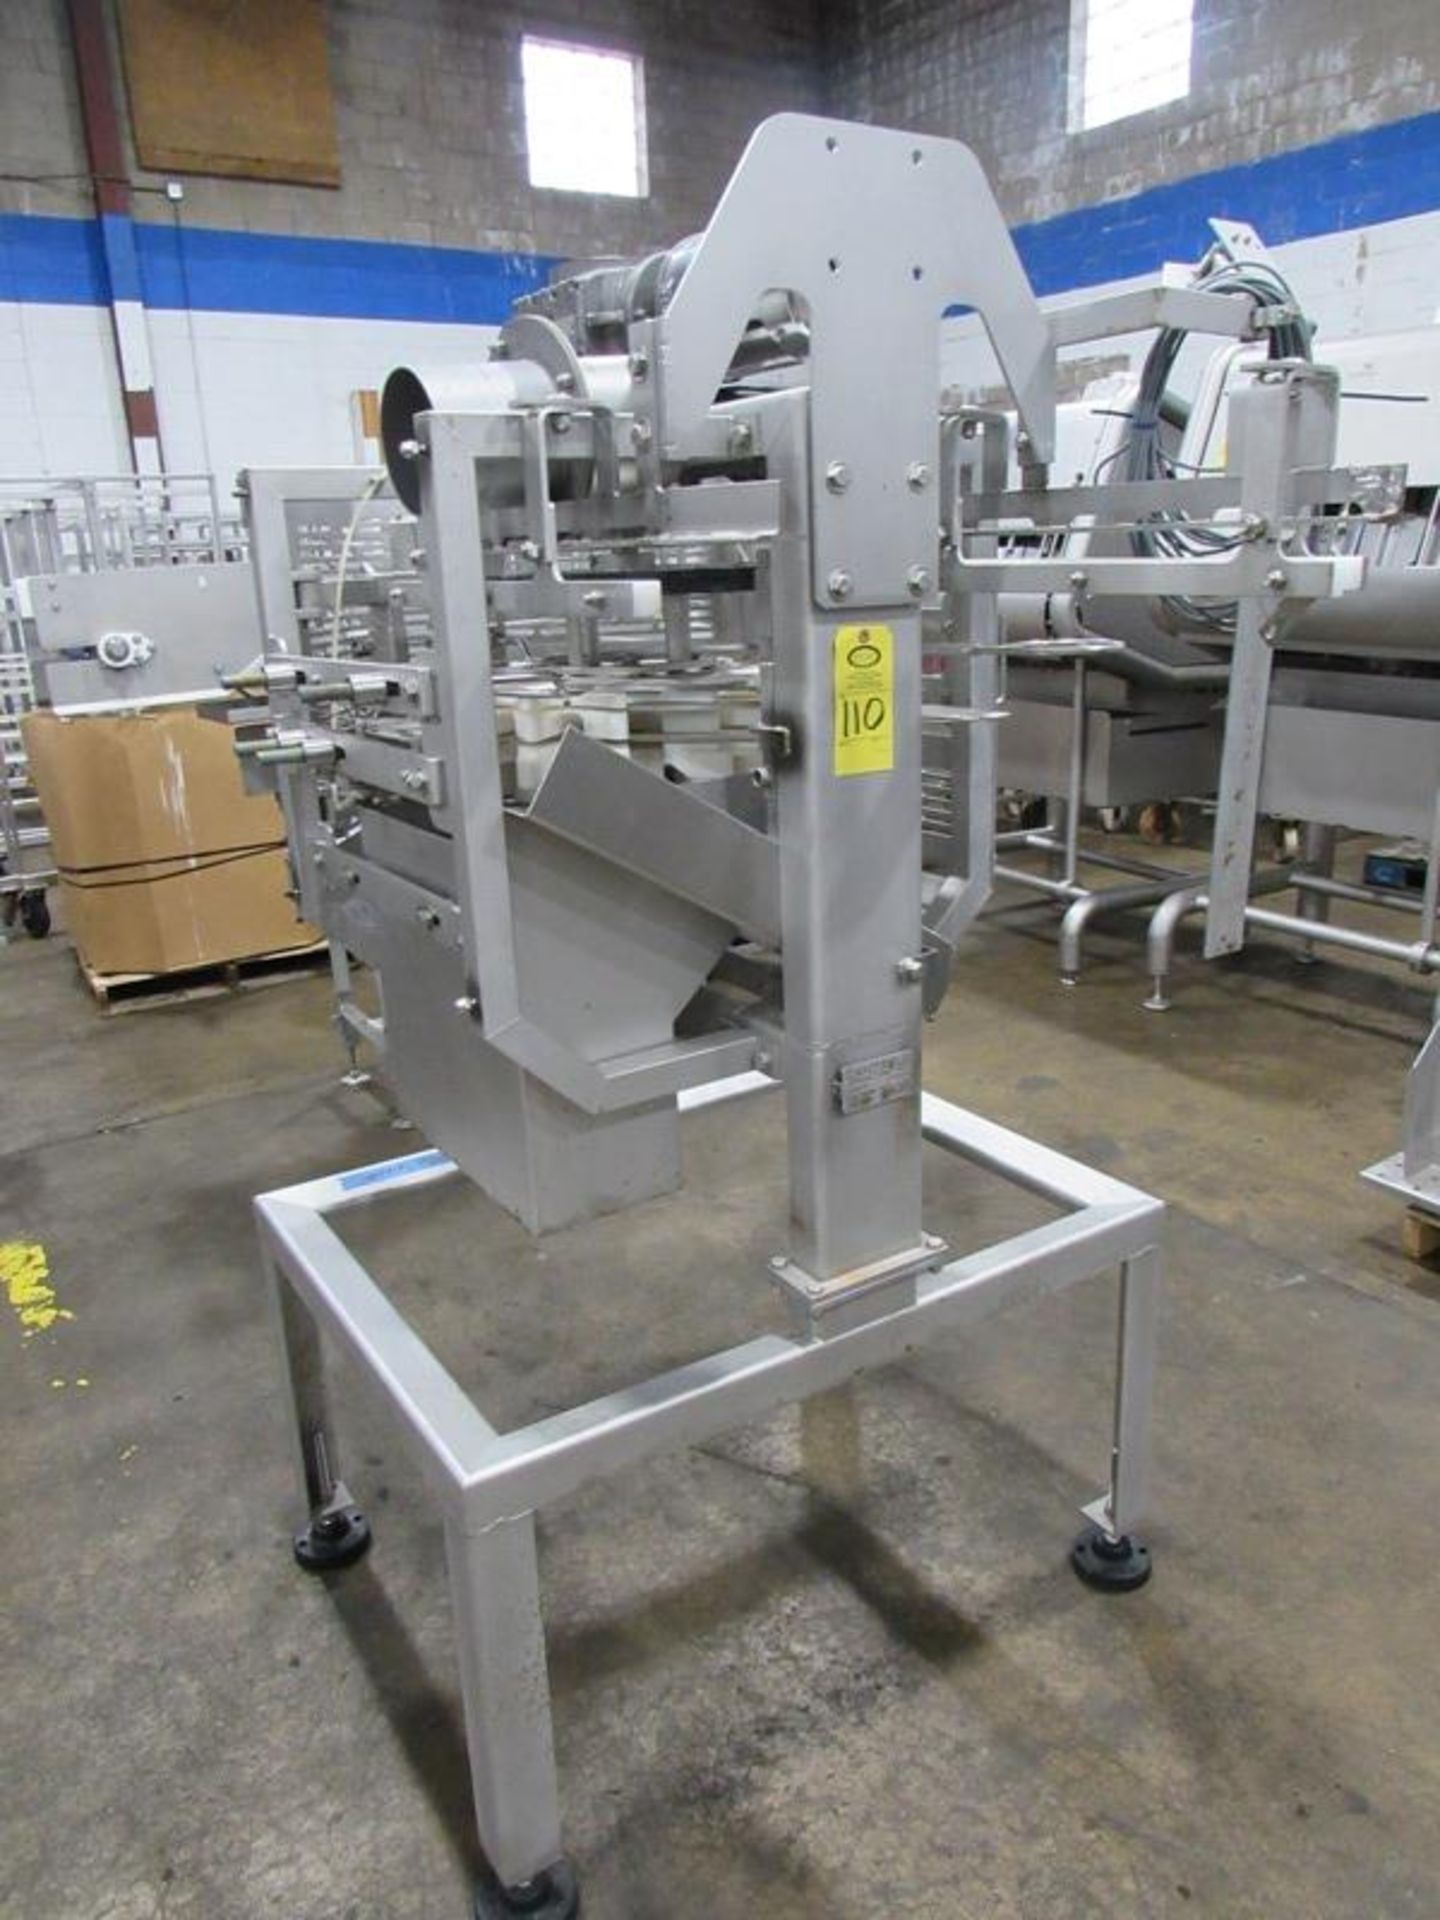 Cantrell Mdl. CWCS-8400 Wing Segmenter, Ser. #21481, with overhead conveyor system, (2) stainless